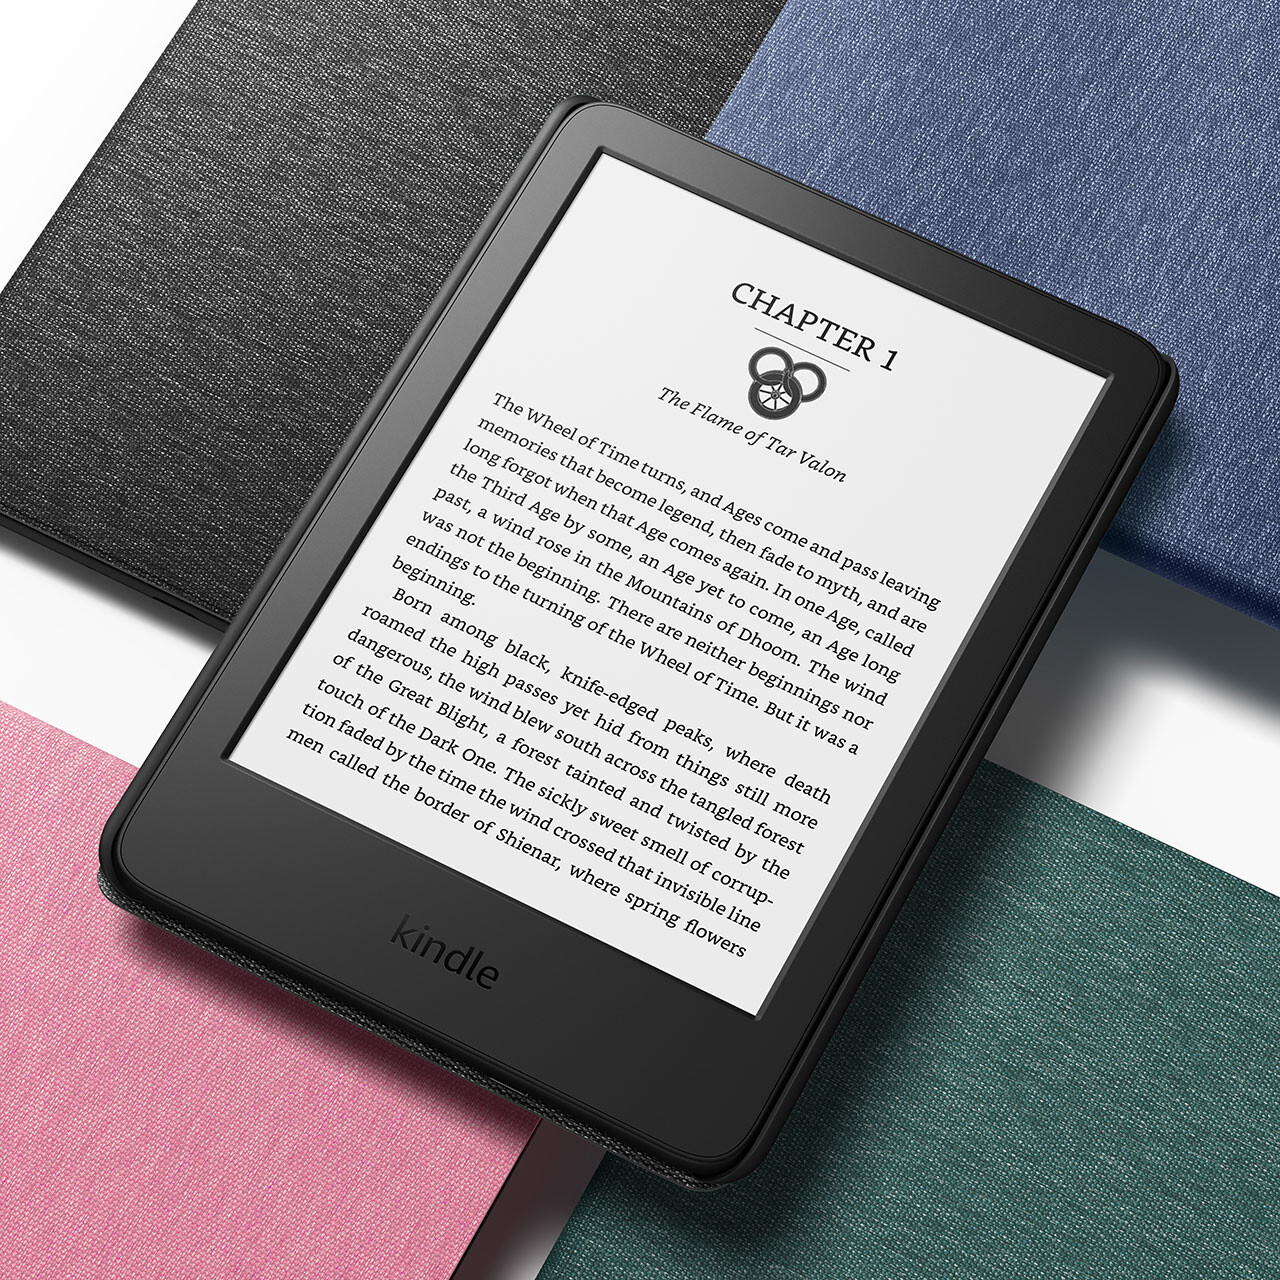 Amazon Announces the AllNew Kindle and Kindle Kids with 300 ppi High